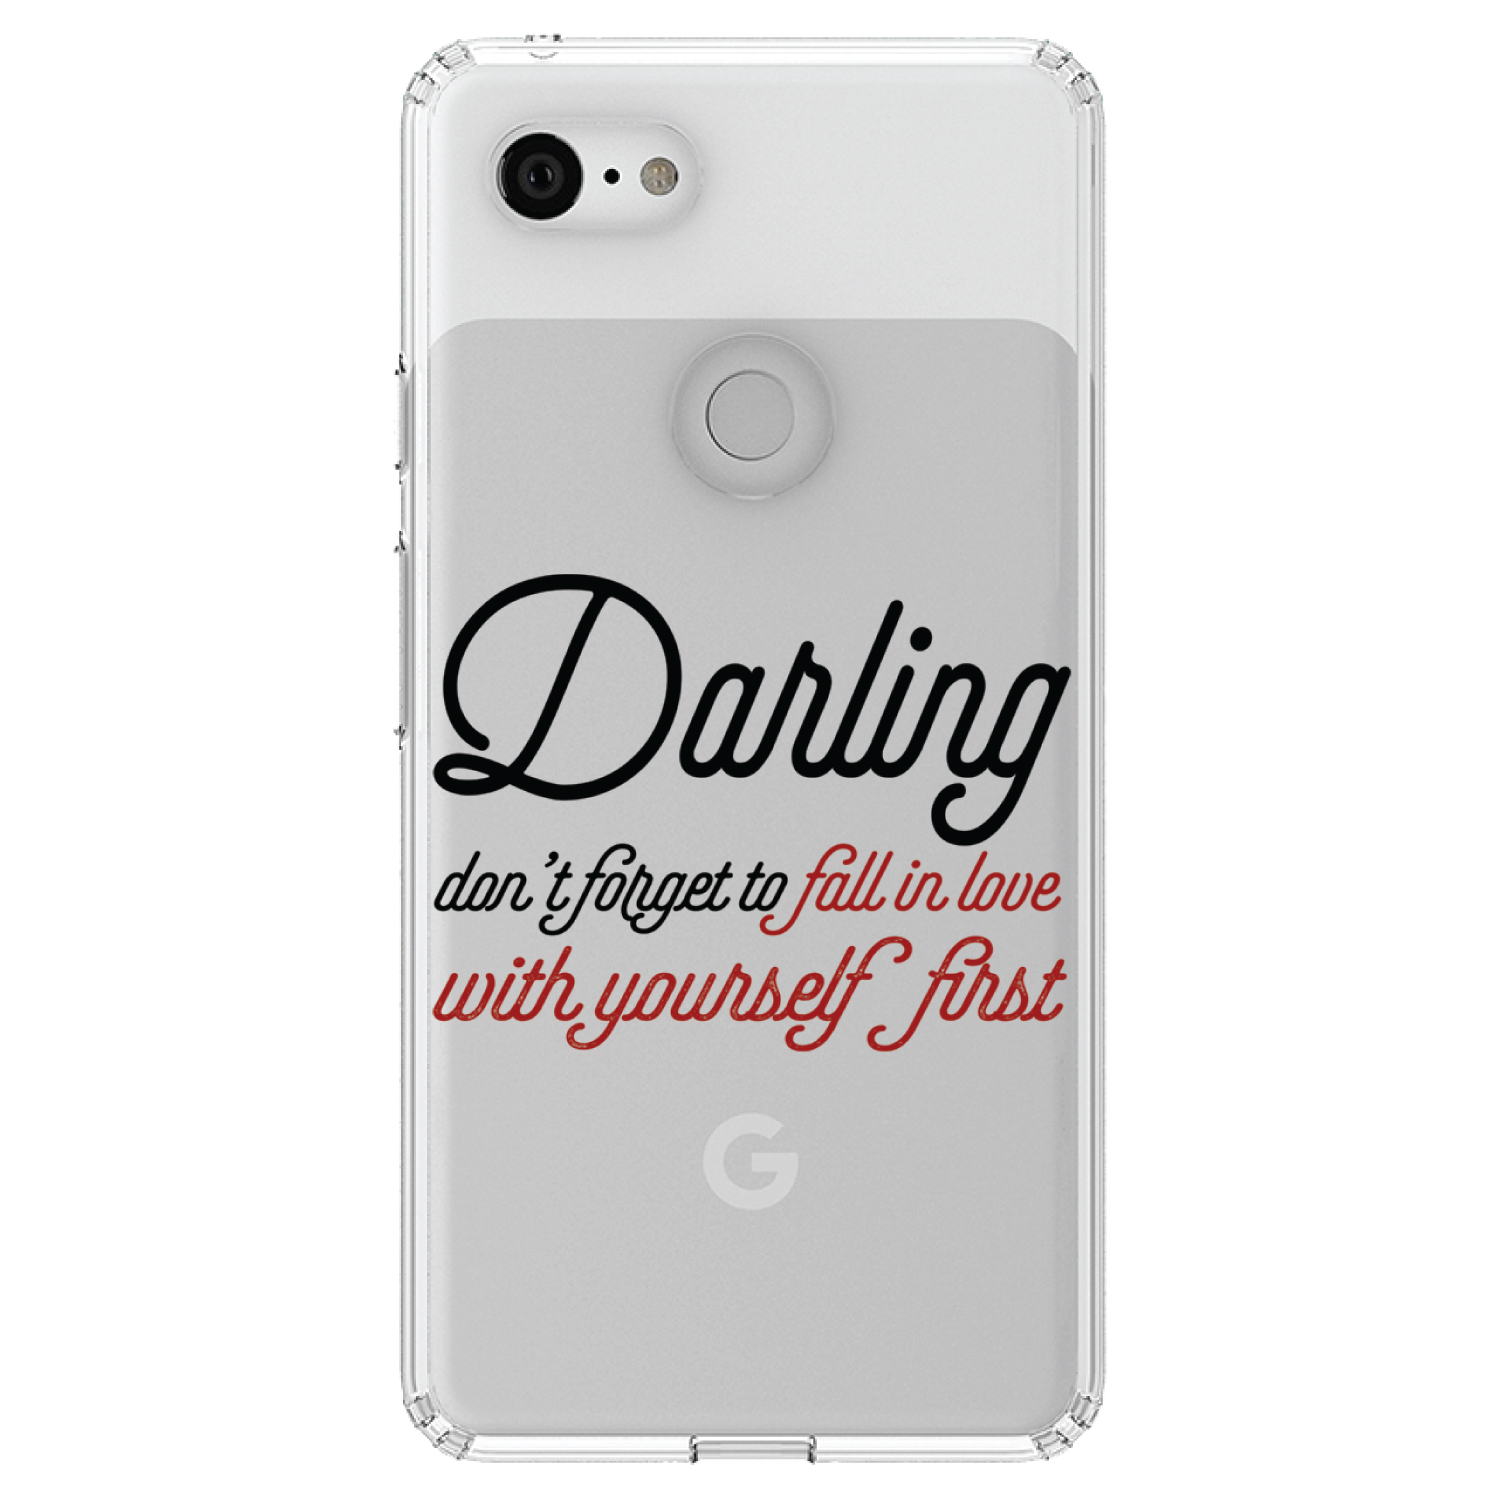 DistinctInk Clear Shockproof Hybrid Case for Google Pixel 3 XL (6.3" Screen) - TPU Bumper Acrylic Back Tempered Glass Screen Protector - Darling Don't Forget to Fall In Love with Yourself - image 1 of 5